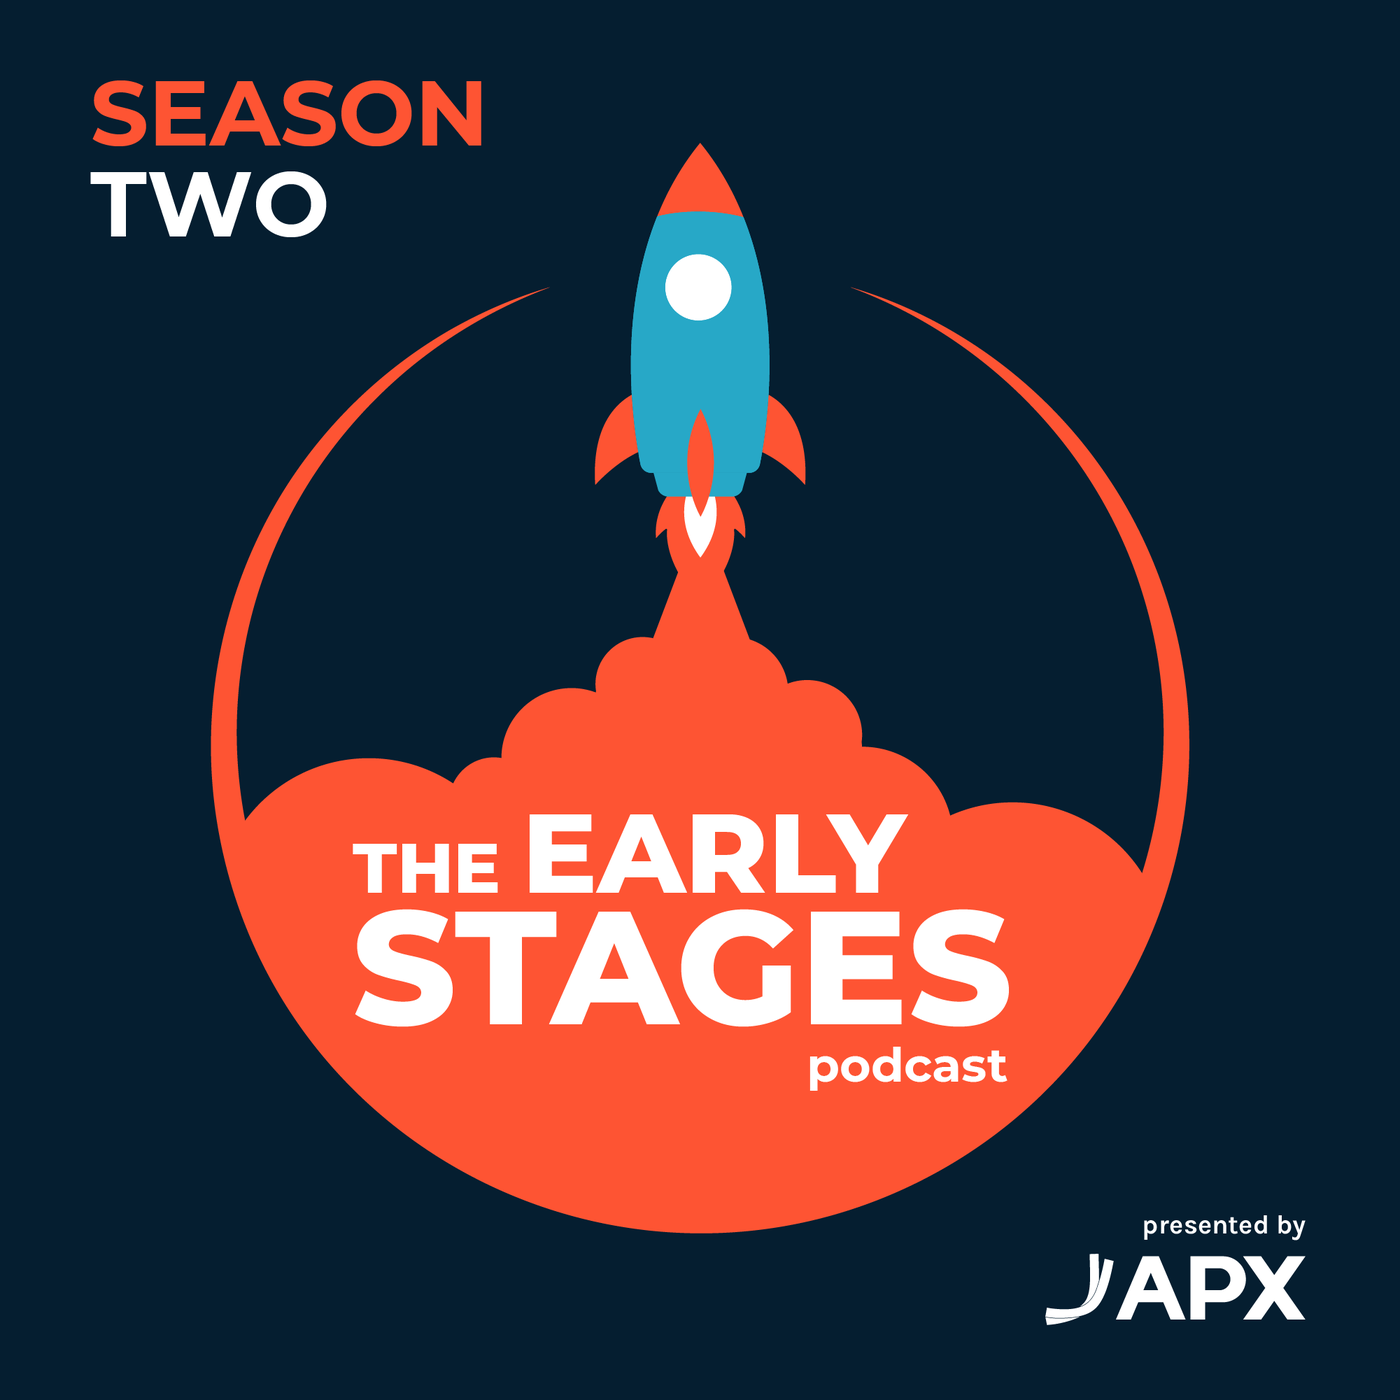 The Early Stages Podcast by APX Season 2 Trailer